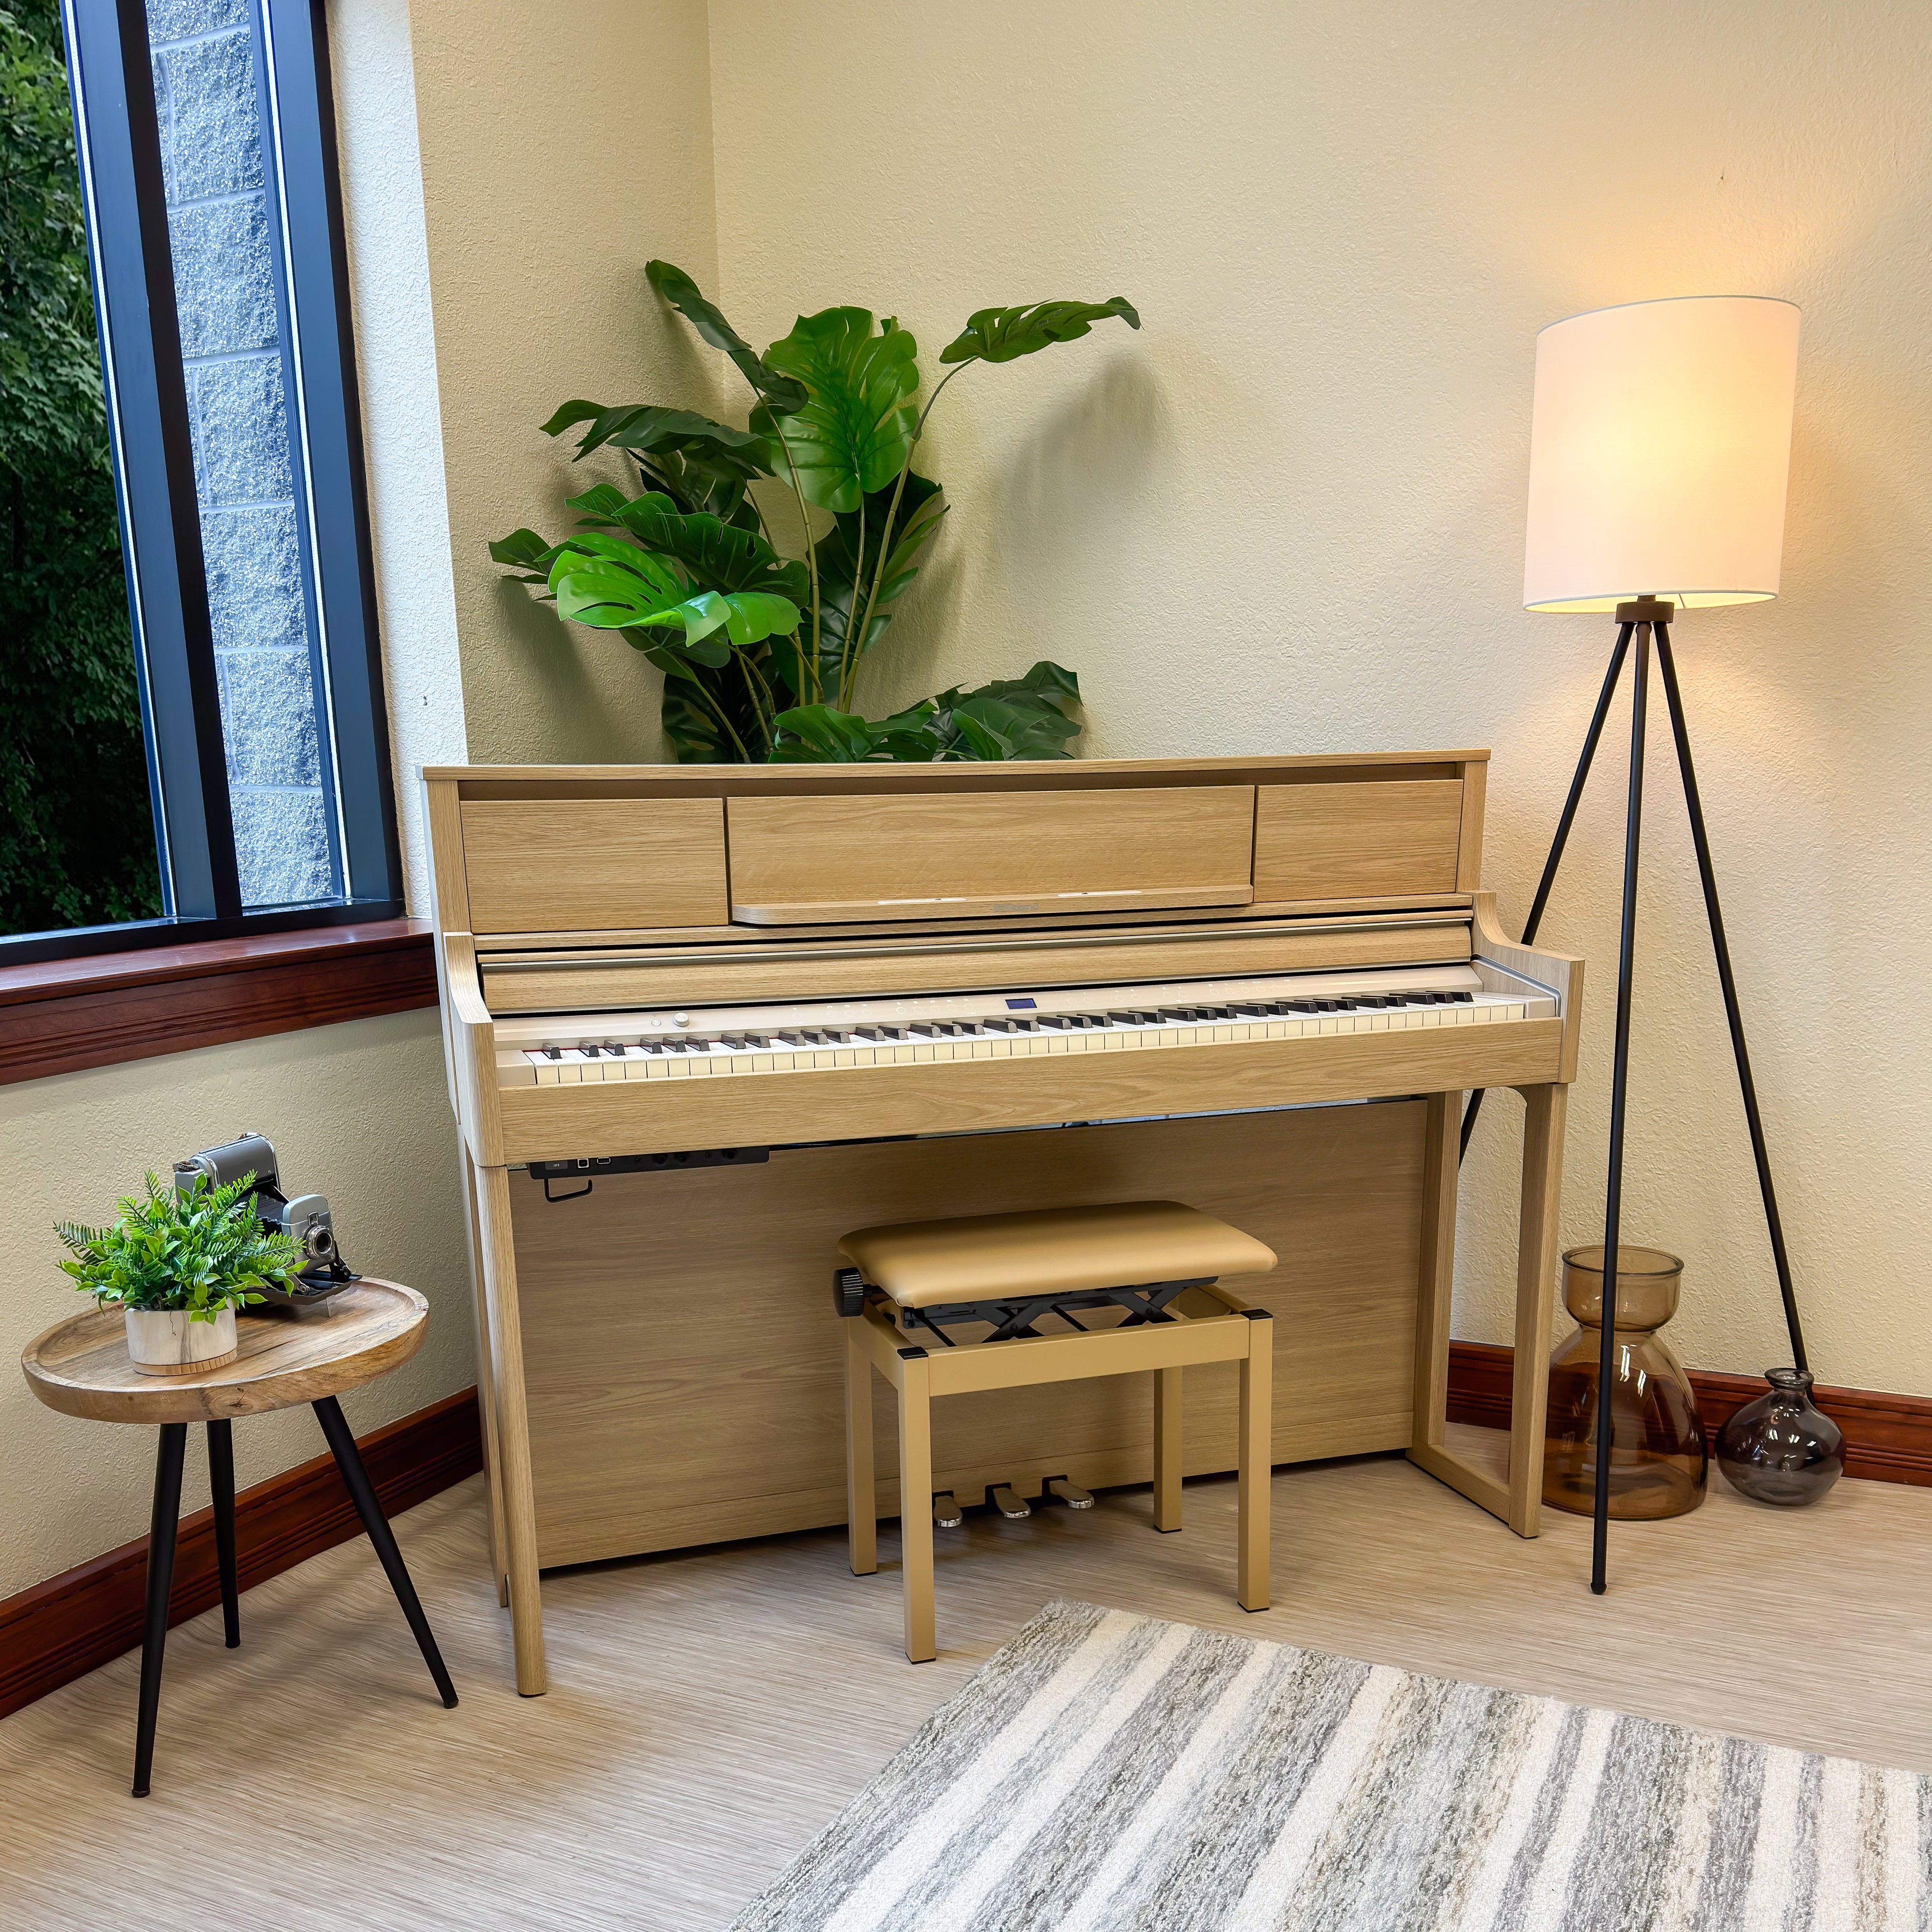 Roland LX-5 Digital Piano with Bench - Light Oak - View 3